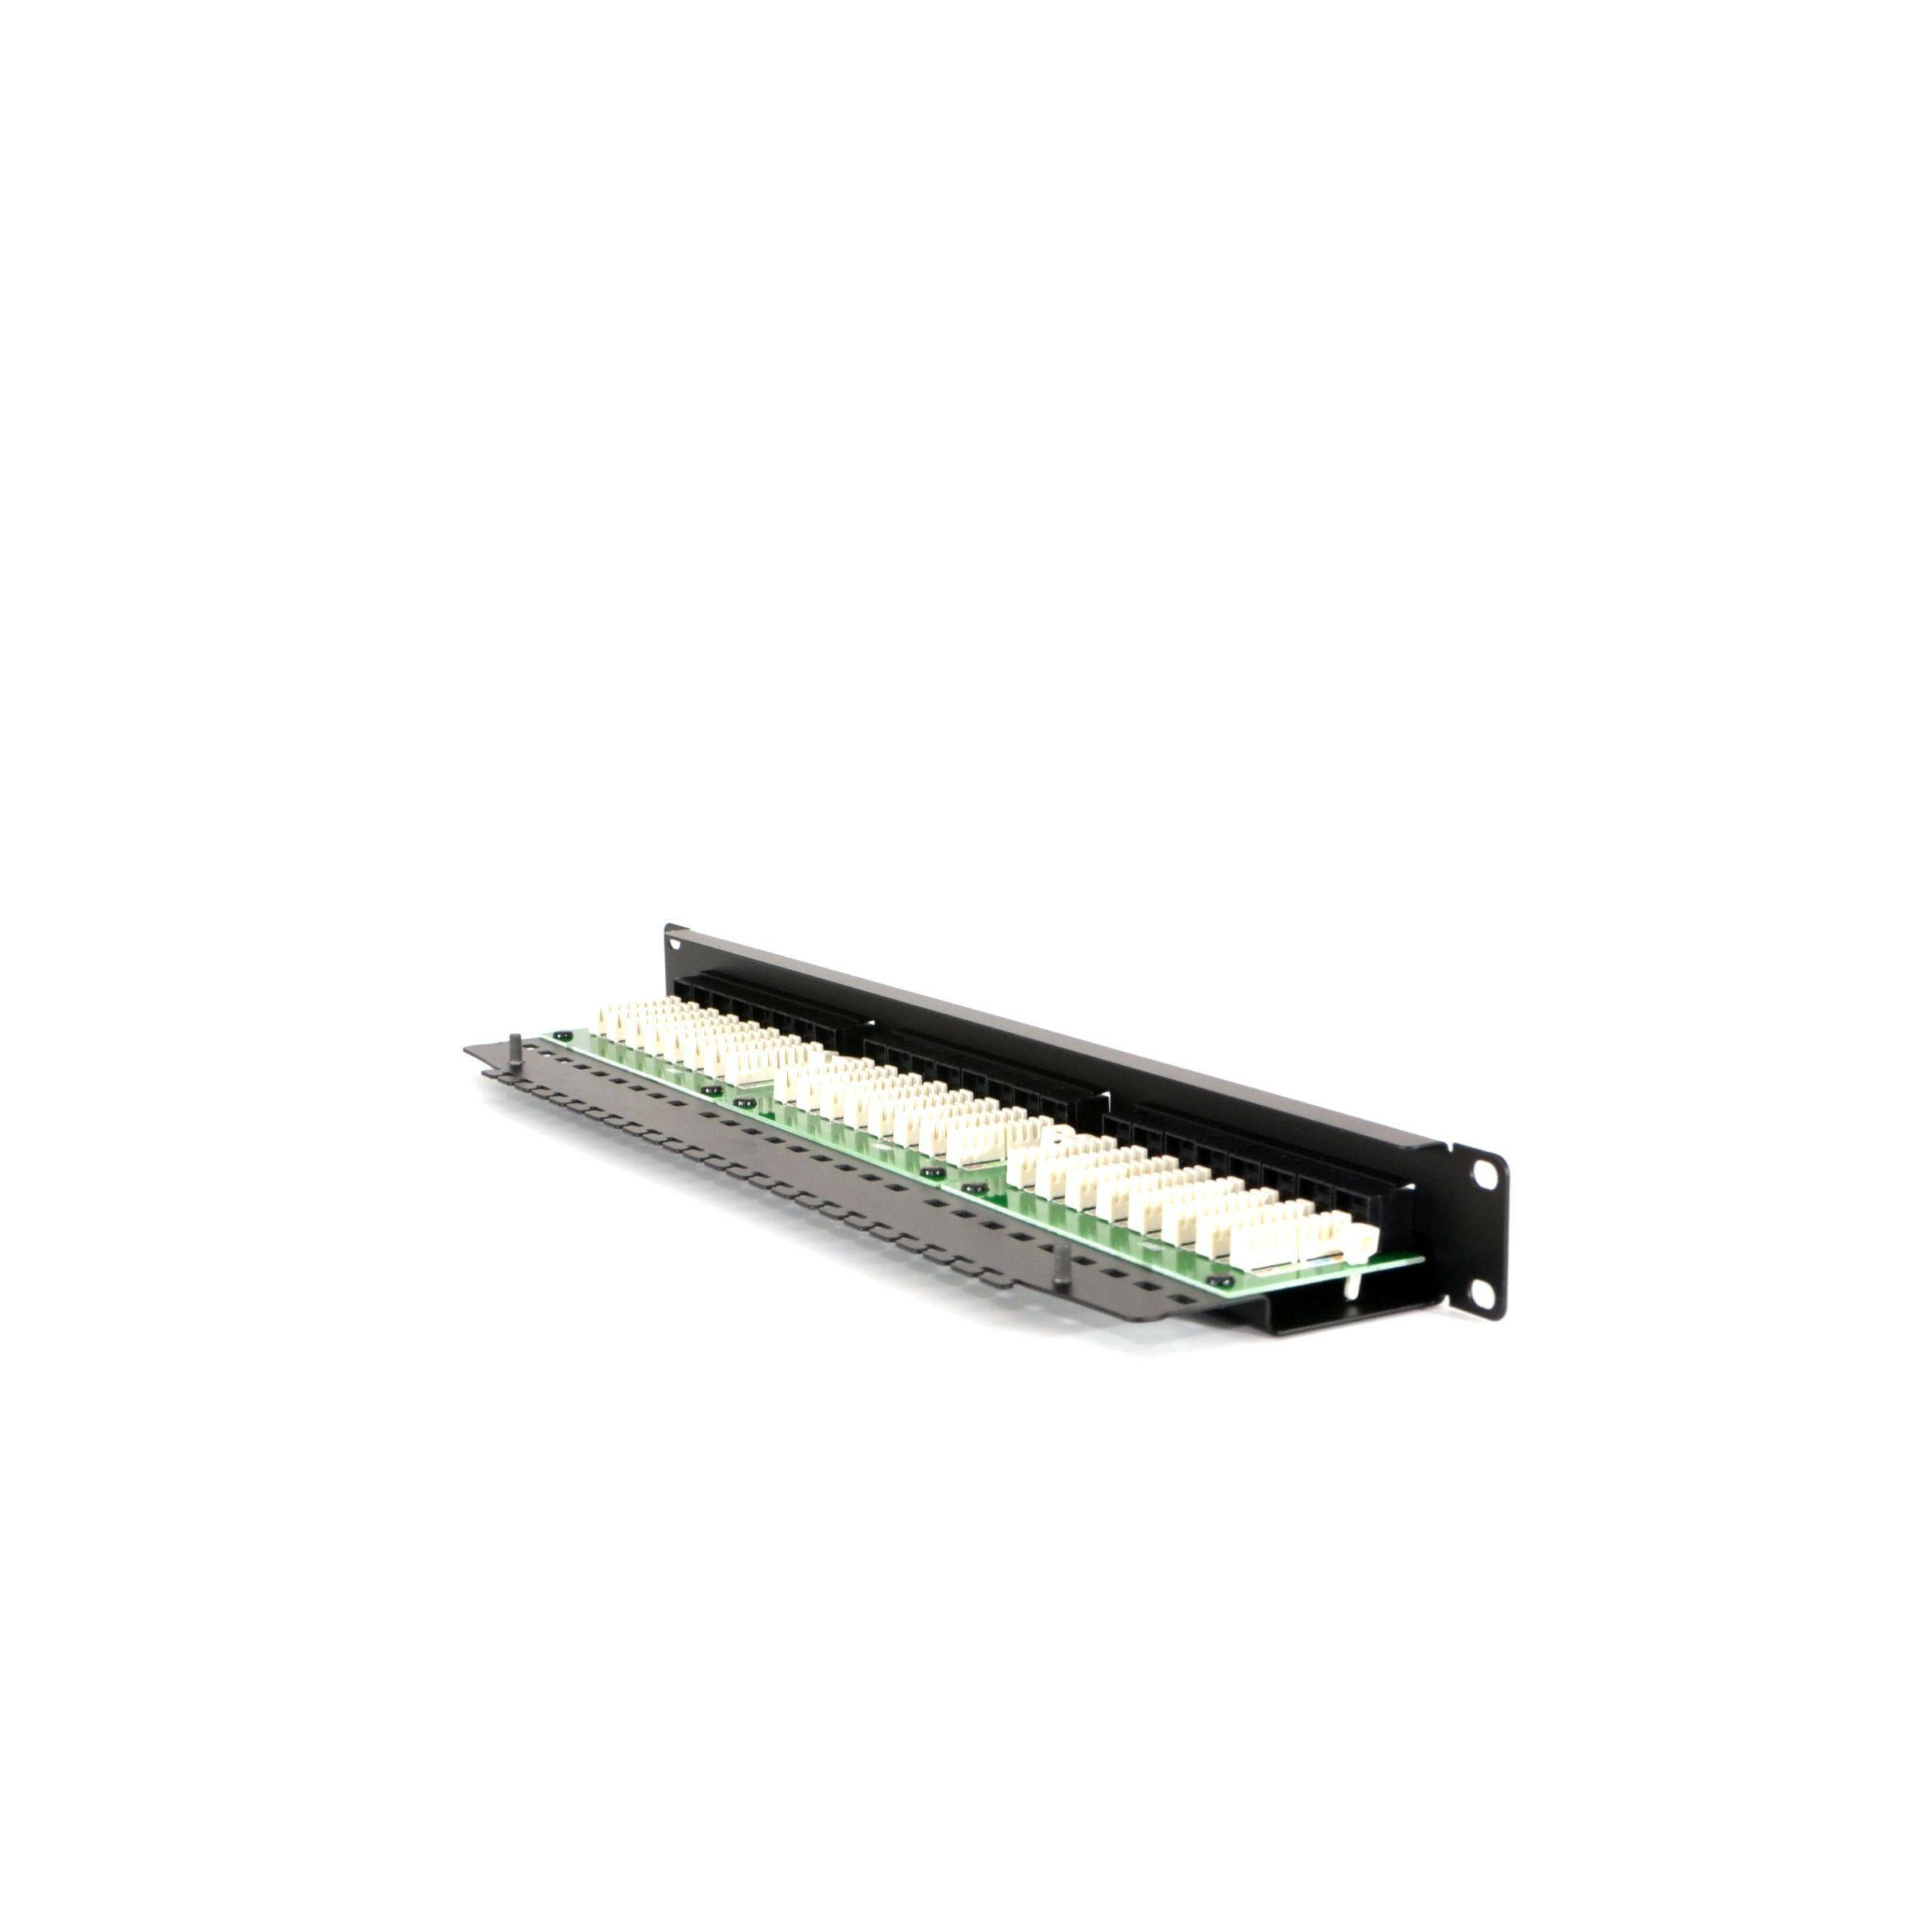 RL-PP24360 Patchpanel 24 portowy kat. 6